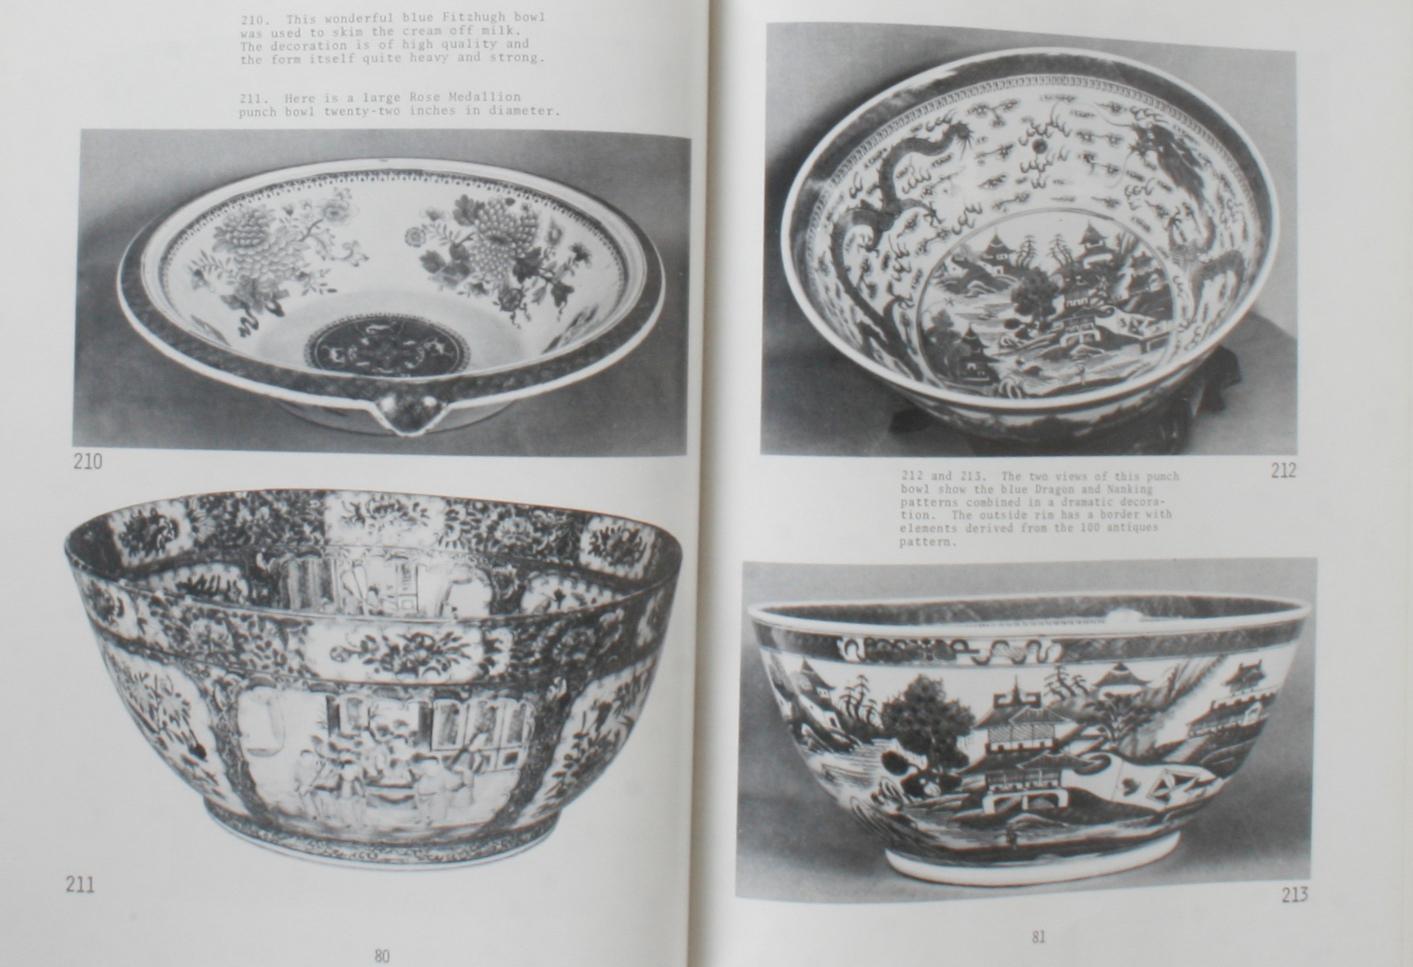 Chinese Export Porcelain, Standard Patterns and Forms, 1780-1880, First Edition For Sale 6